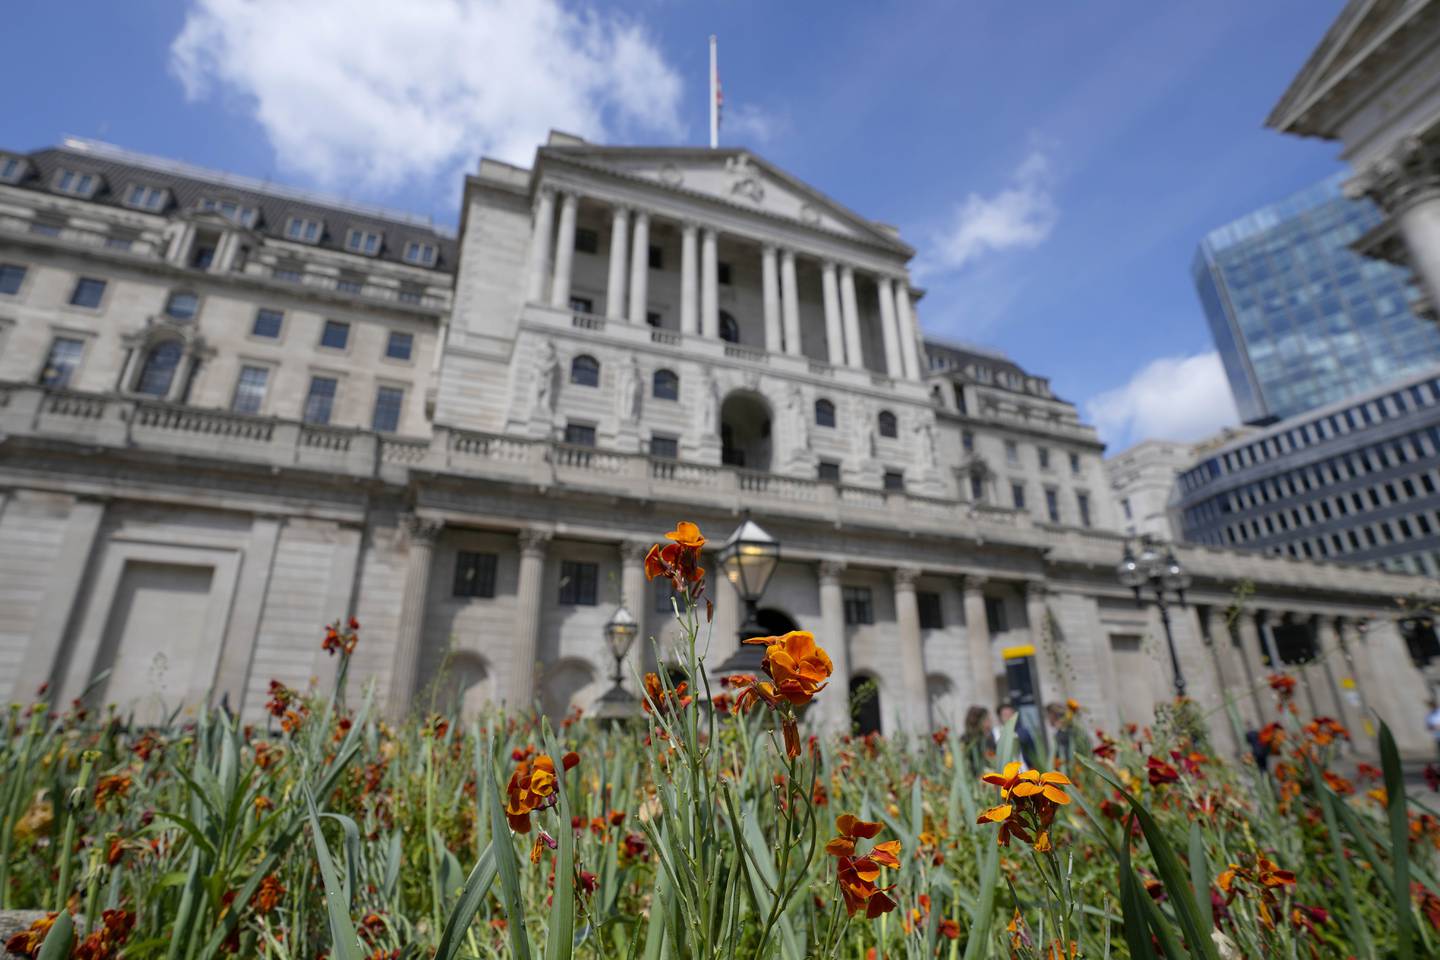 The Bank of England forecast Britain's economy would shrink by up to 1 per cent in the final quarter of this year and also contract over 2023 as a whole. AP